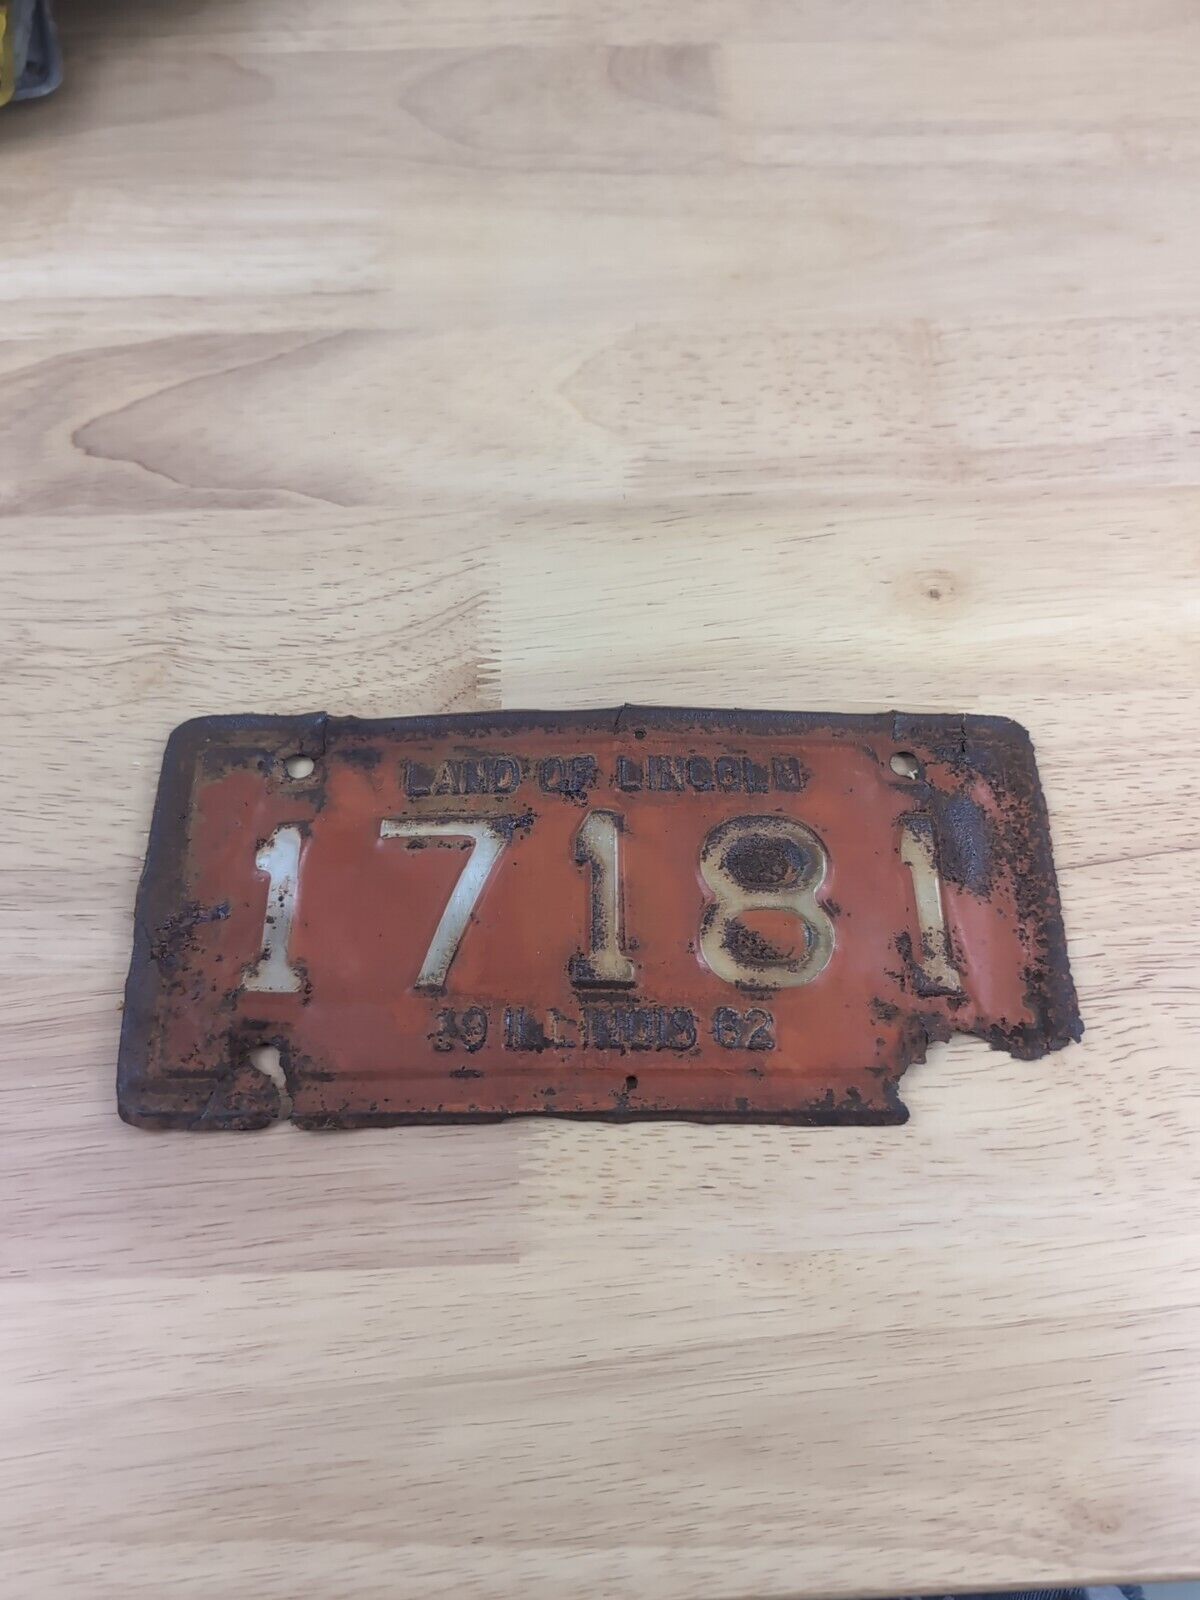 Illinois 1962 Motorcycle License Plate